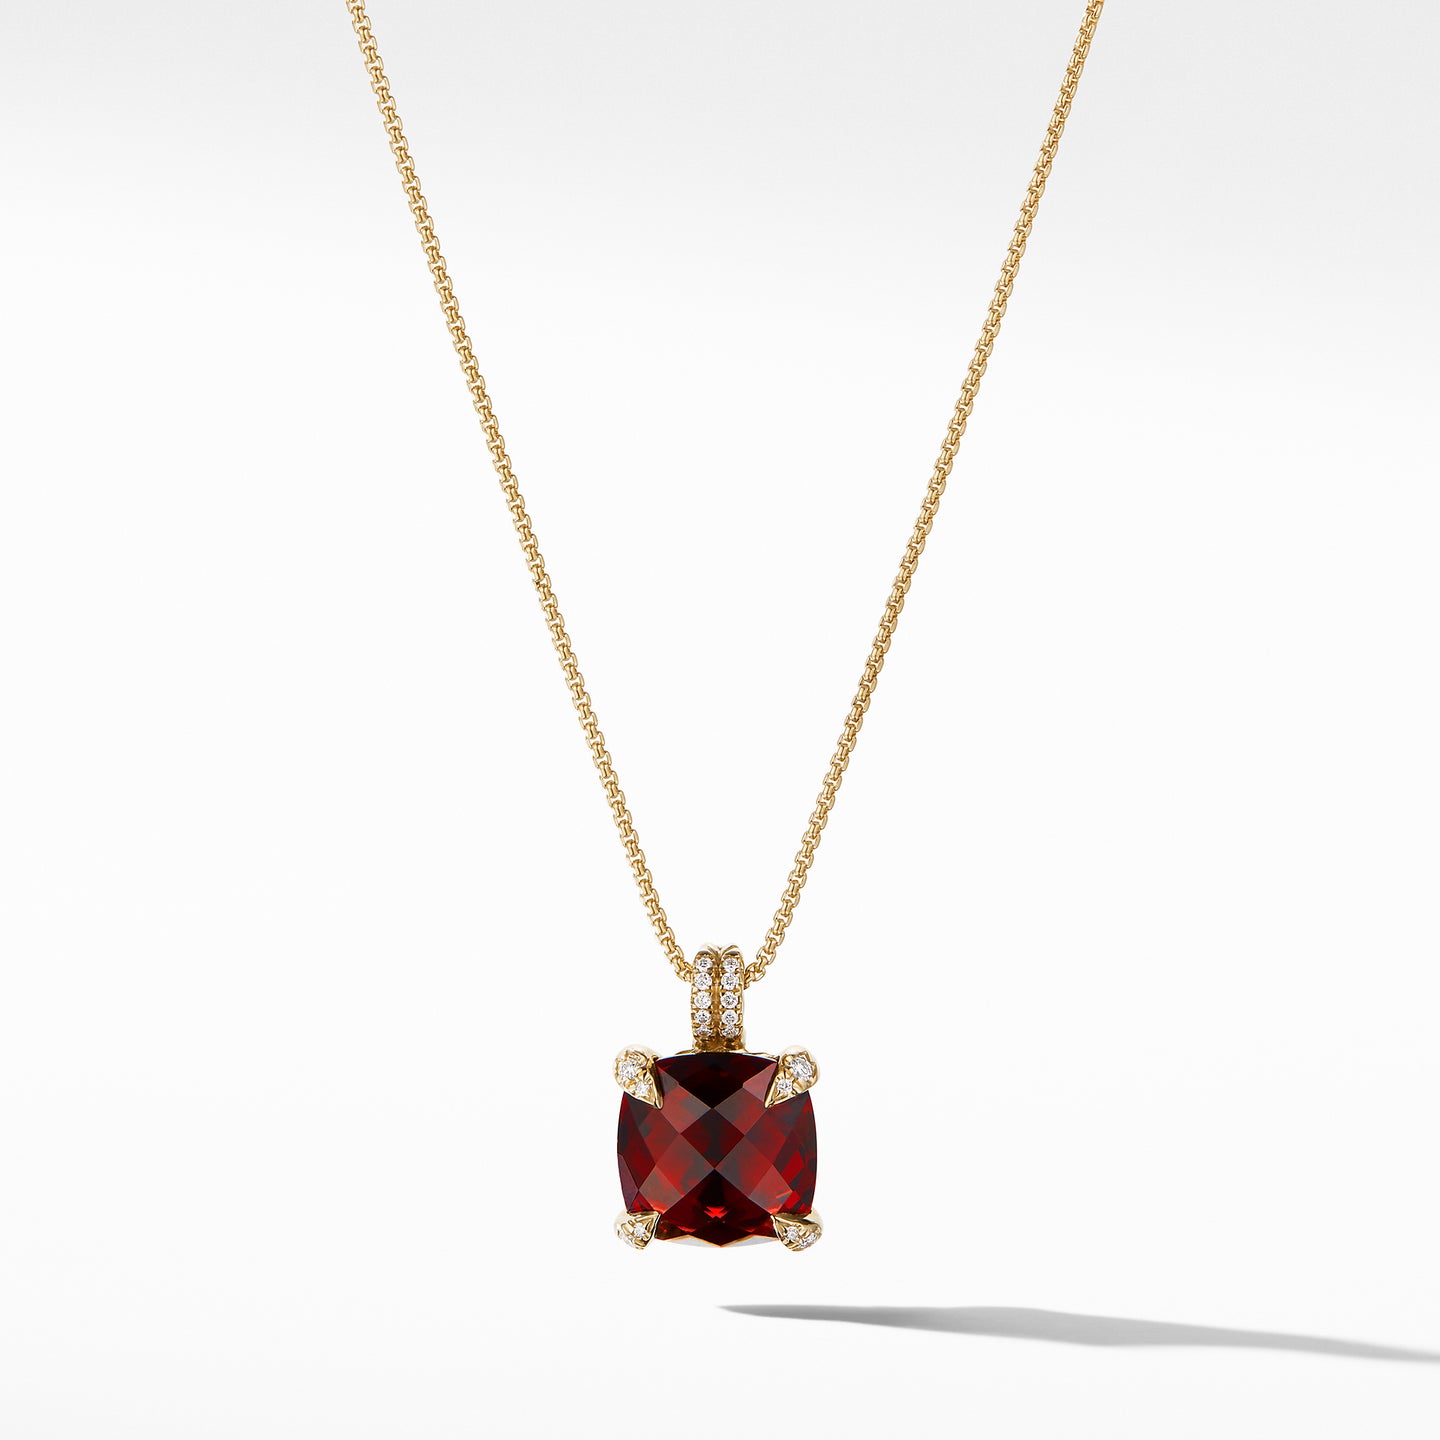 Pendant Necklace with Garnet and Diamonds in 18K Gold, 18